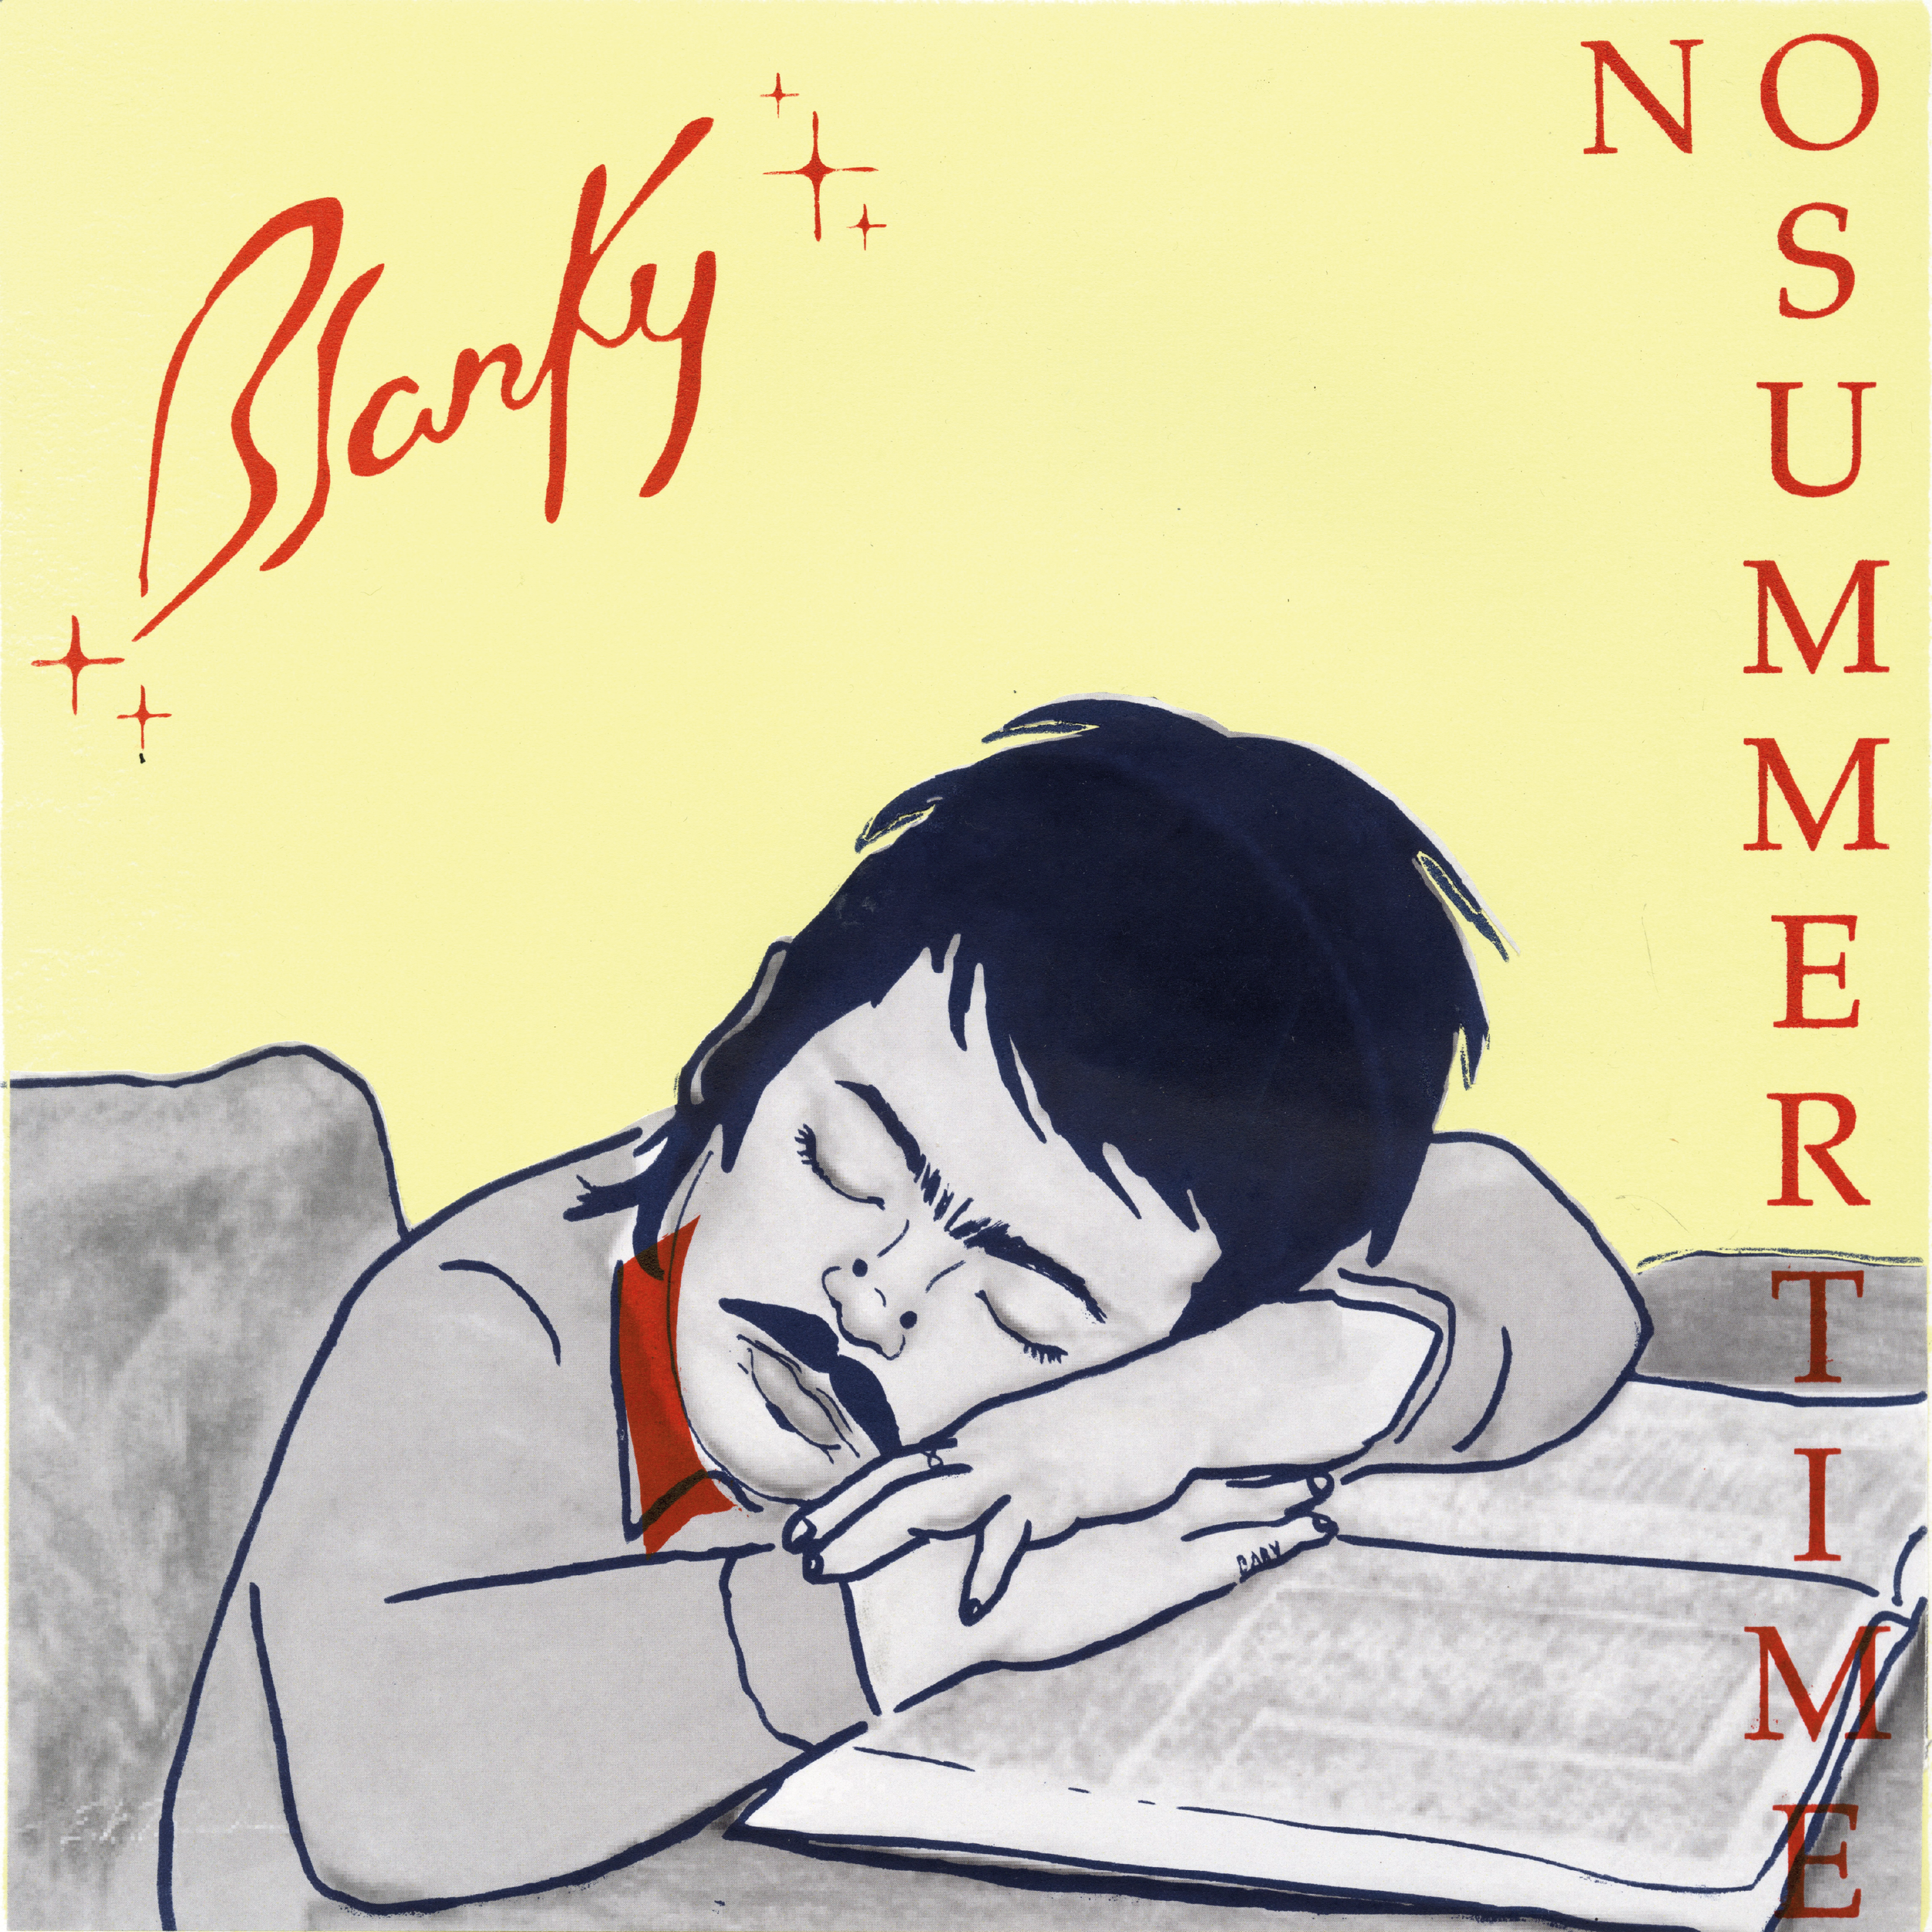 BLANKY - "NO SUMMERTIME" (2020)